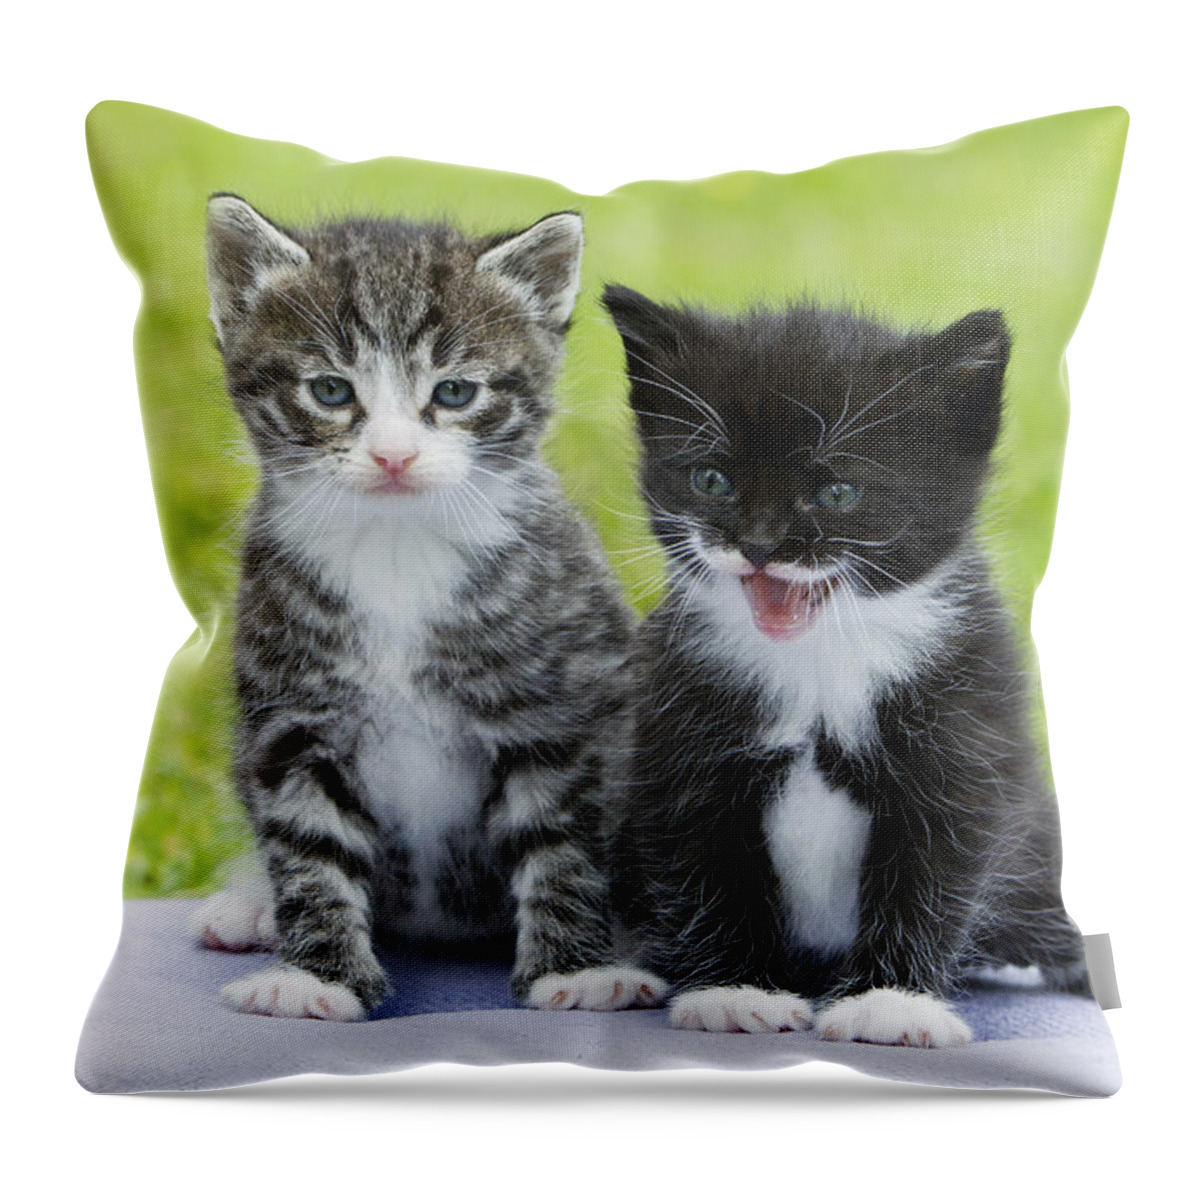 Feb0514 Throw Pillow featuring the photograph Tabby And Black Kittens by Duncan Usher